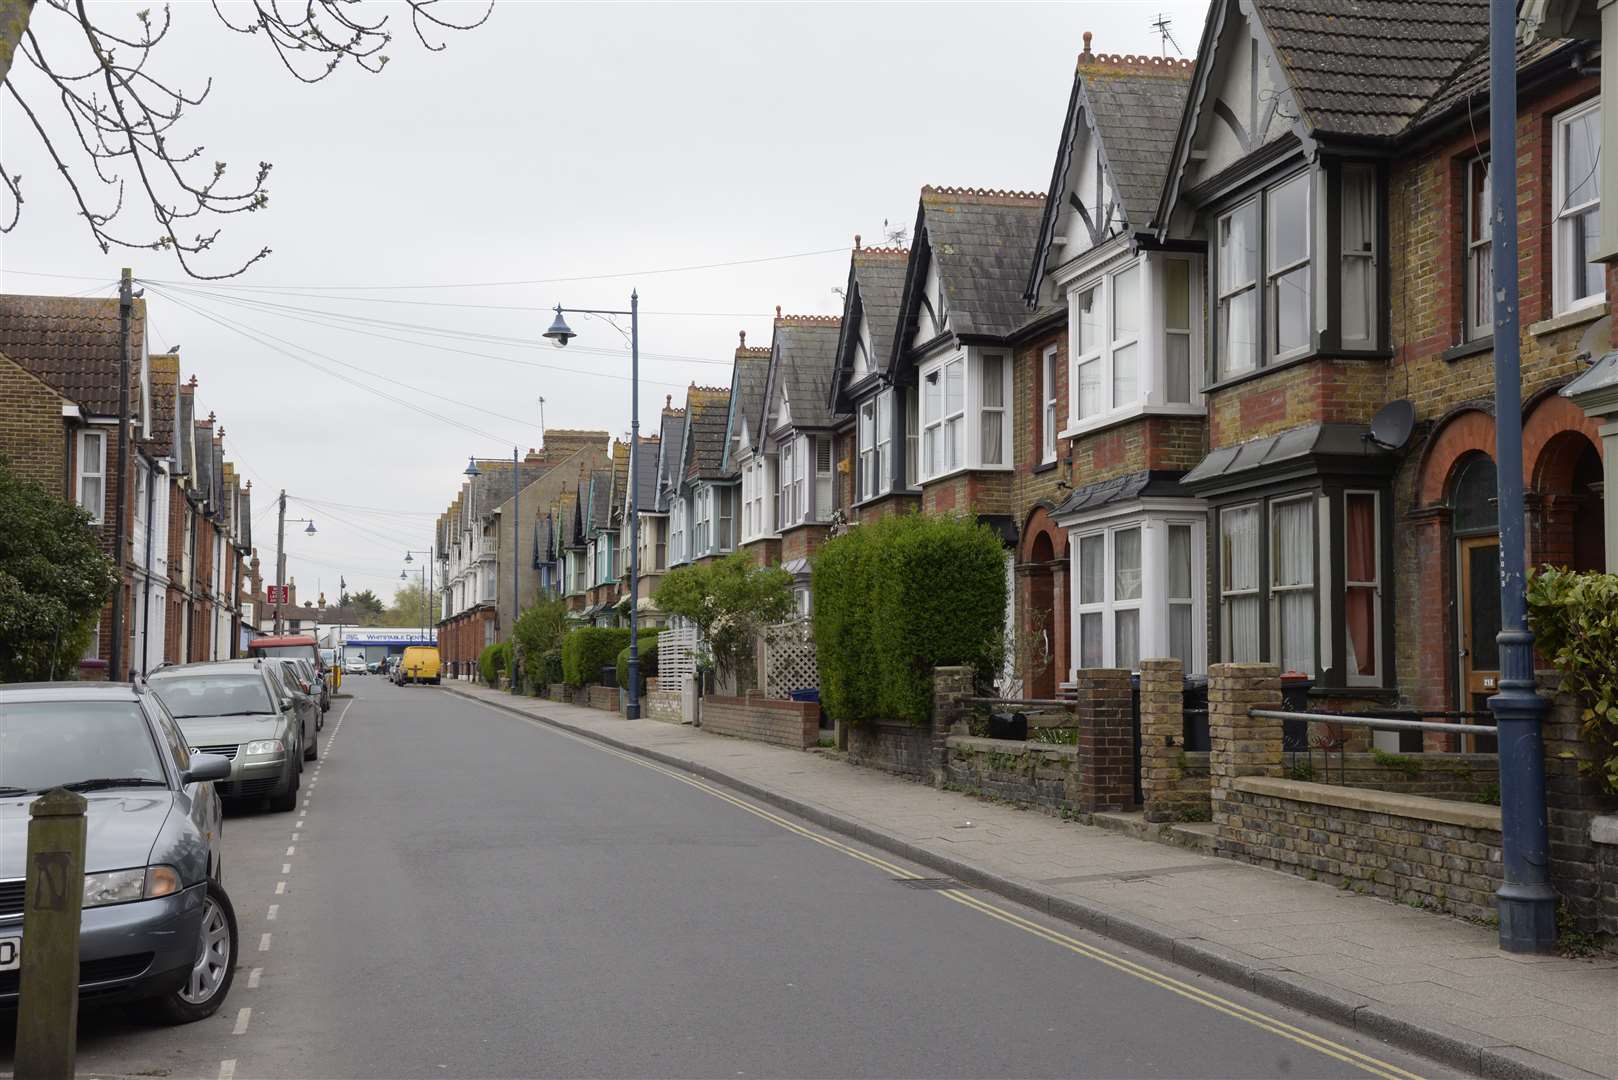 Cromwell Road, Whitstable, is where Brenda was murdered